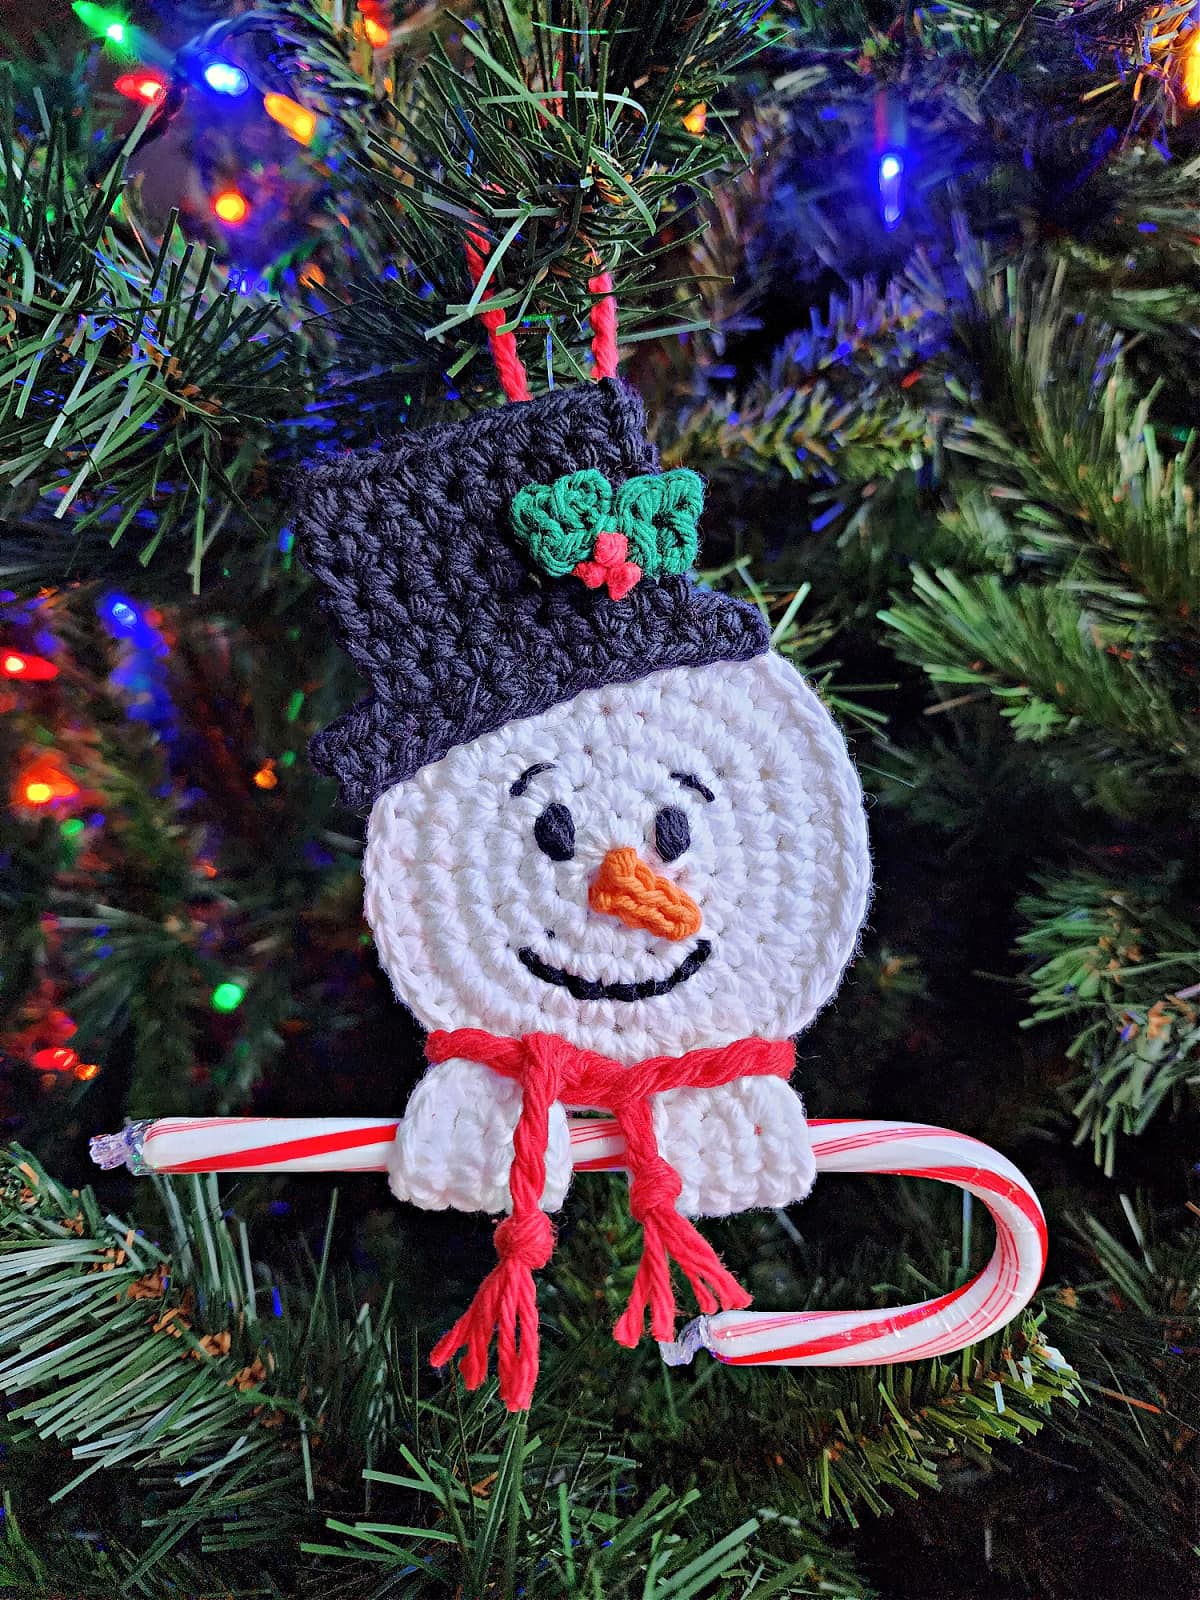 Make A Christmas Tree With Blanket-EZ Yarn - Cute As A Button Crochet